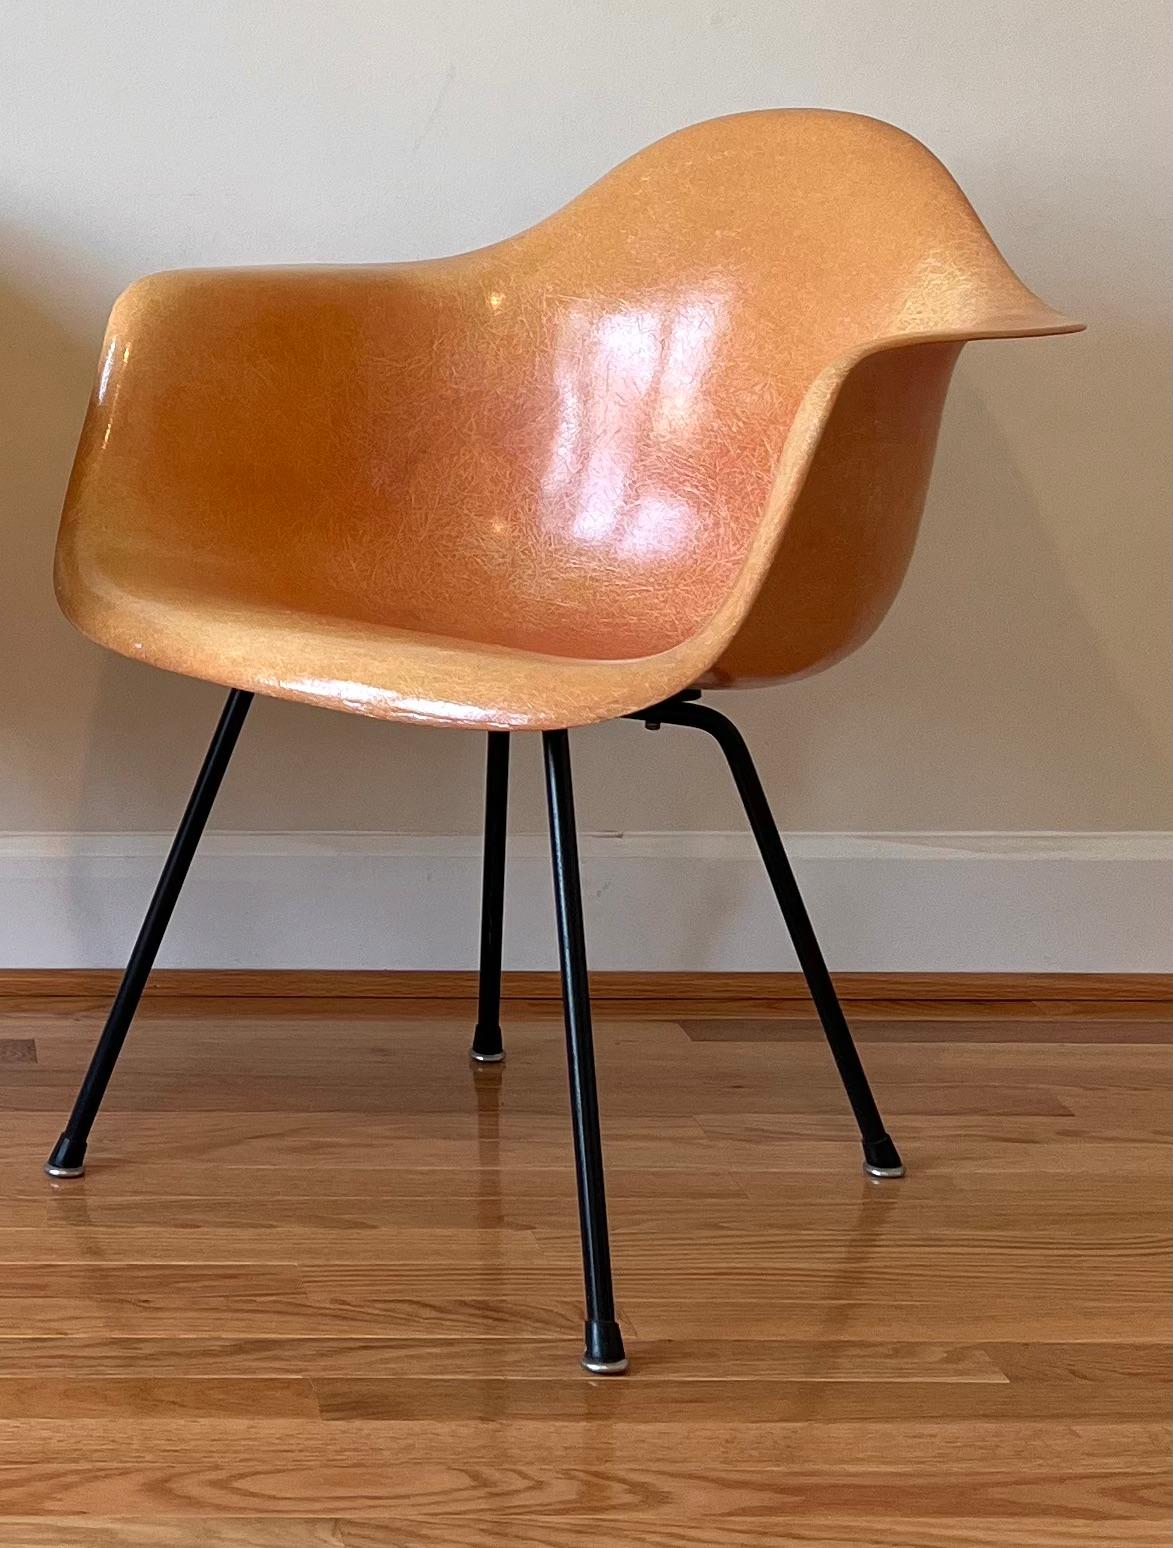 Eames Max

The original first generation of chairs released in 1950 had 3 Size options which were DAX (Dining), Standard (SAX) and Low (LAX). With only a 1-inch difference between the SAX and DAX the choice was refined to 2 sizes in 1953, keeping